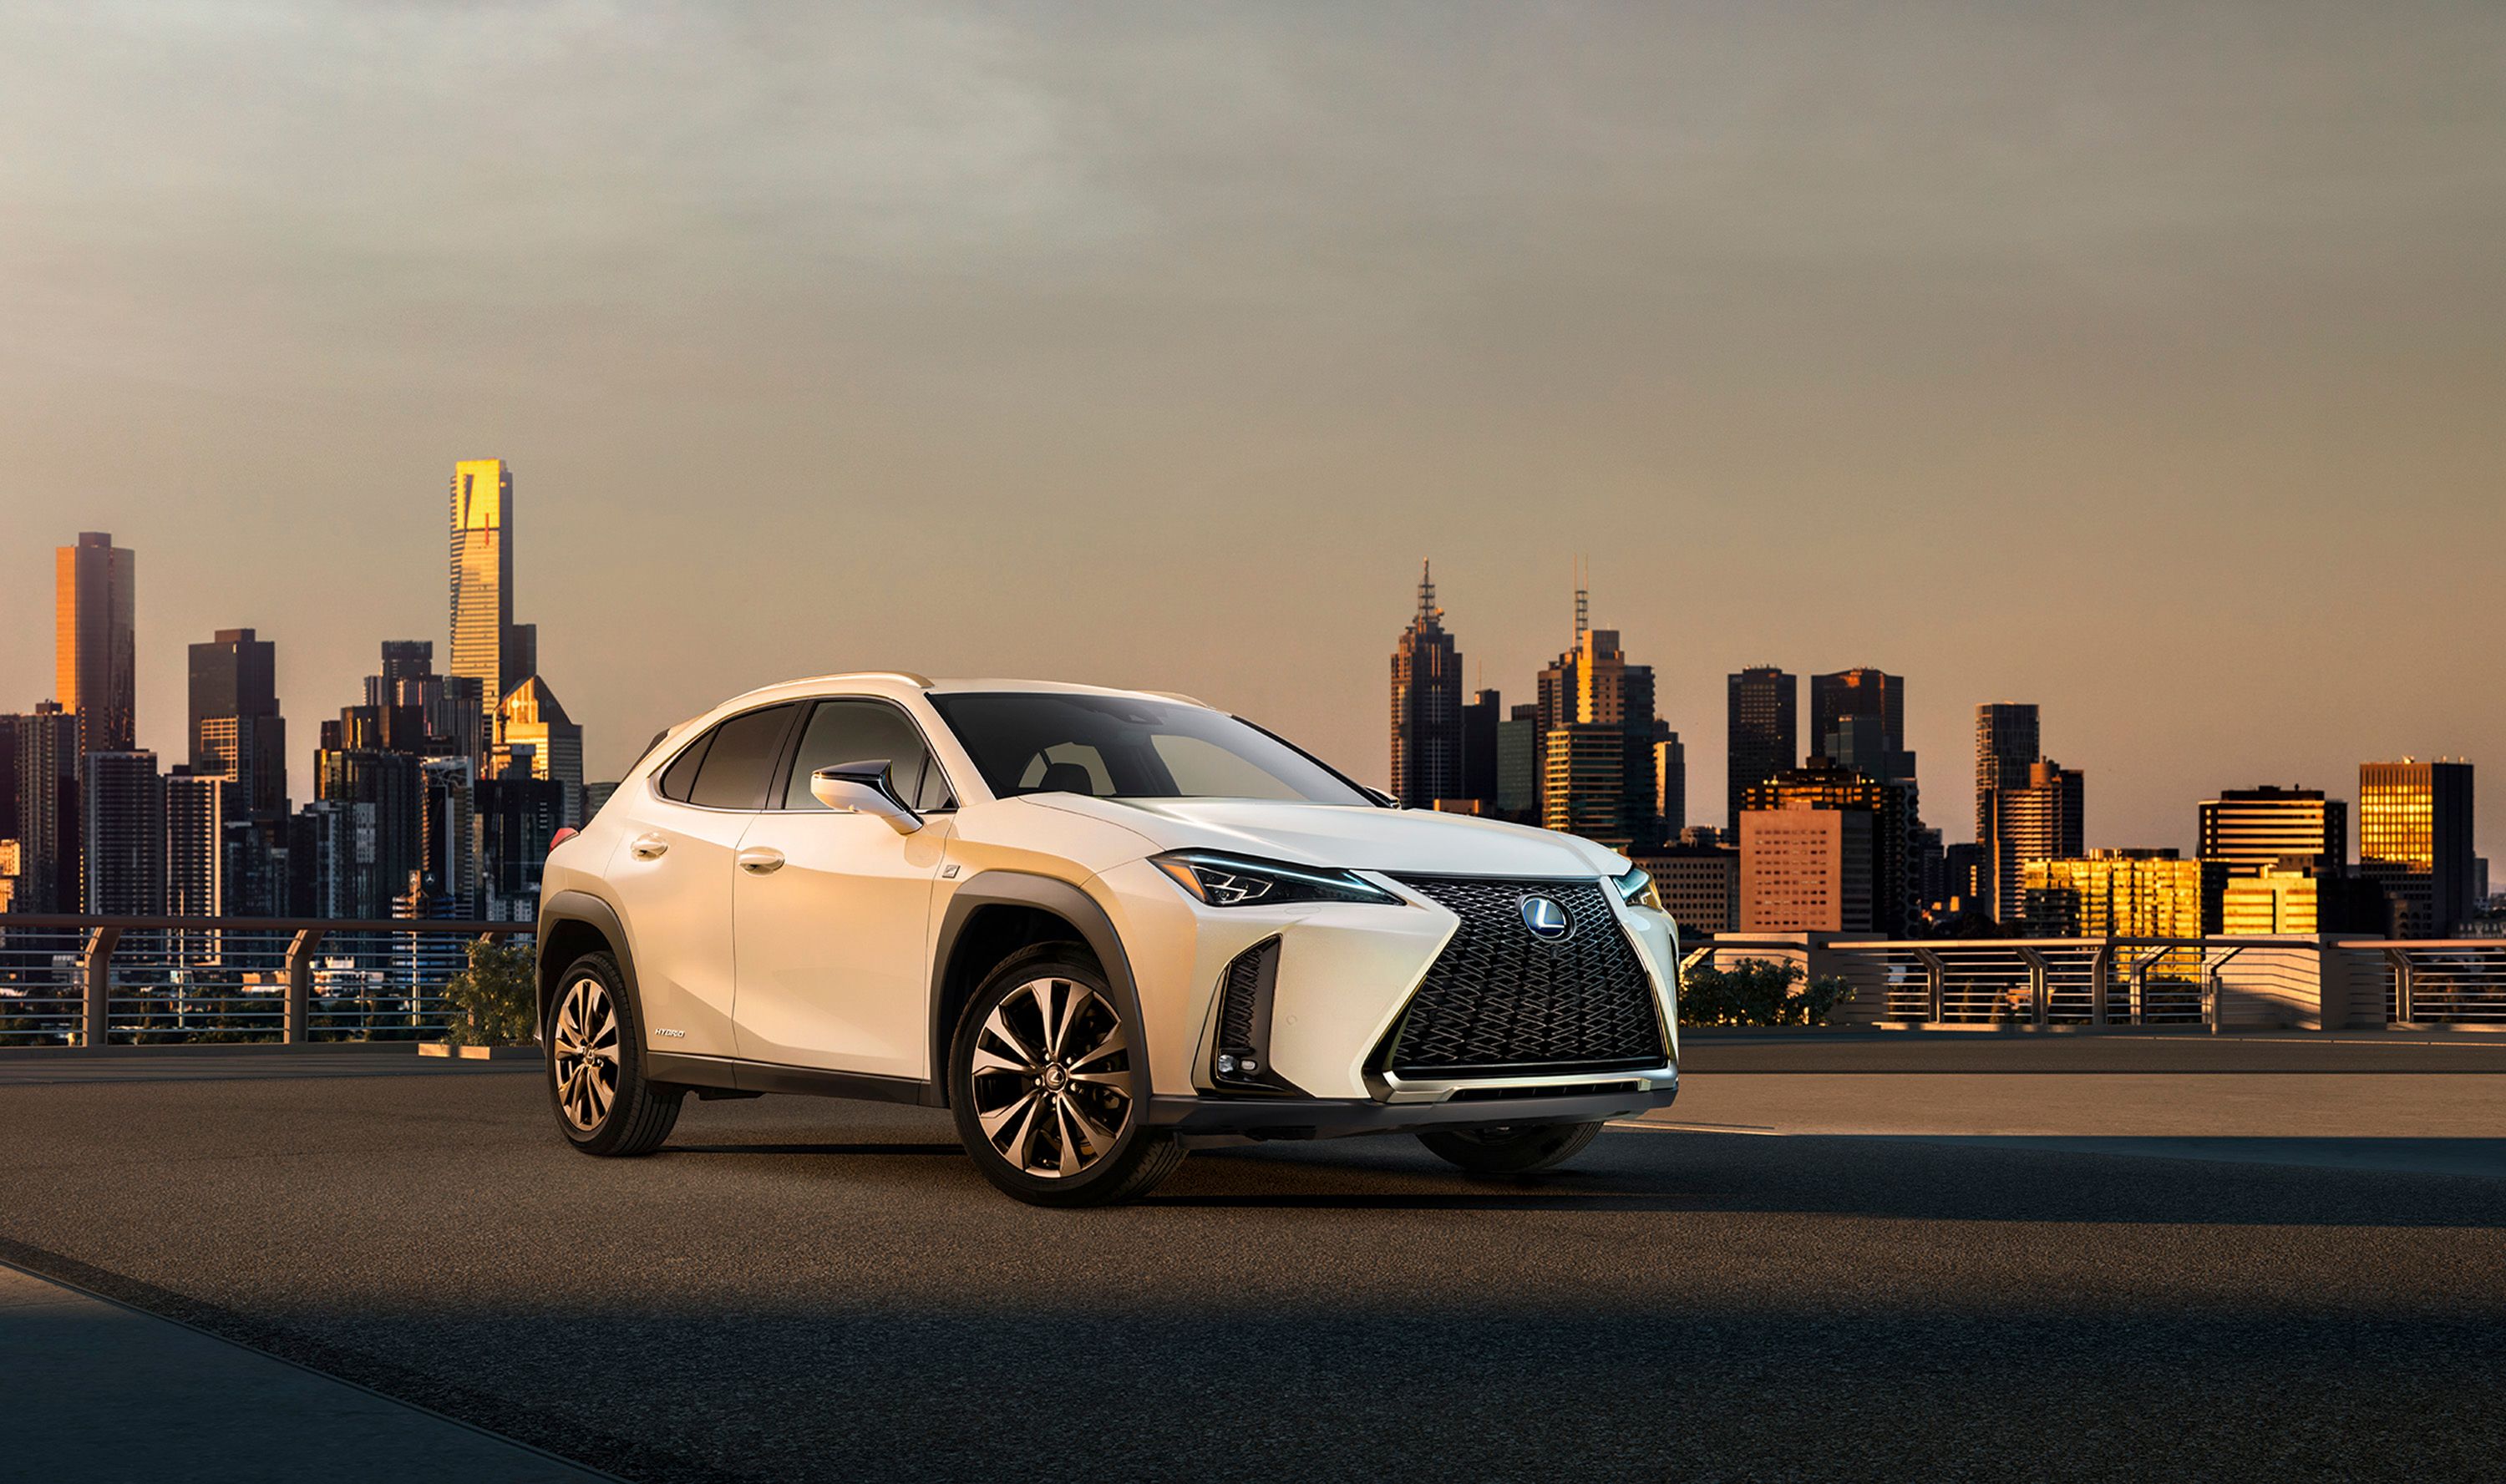 2018 The Lexus UX Will Take on the BMW X1 and Audi Q3 in the U.S., Will be Offered on new Subscription Service